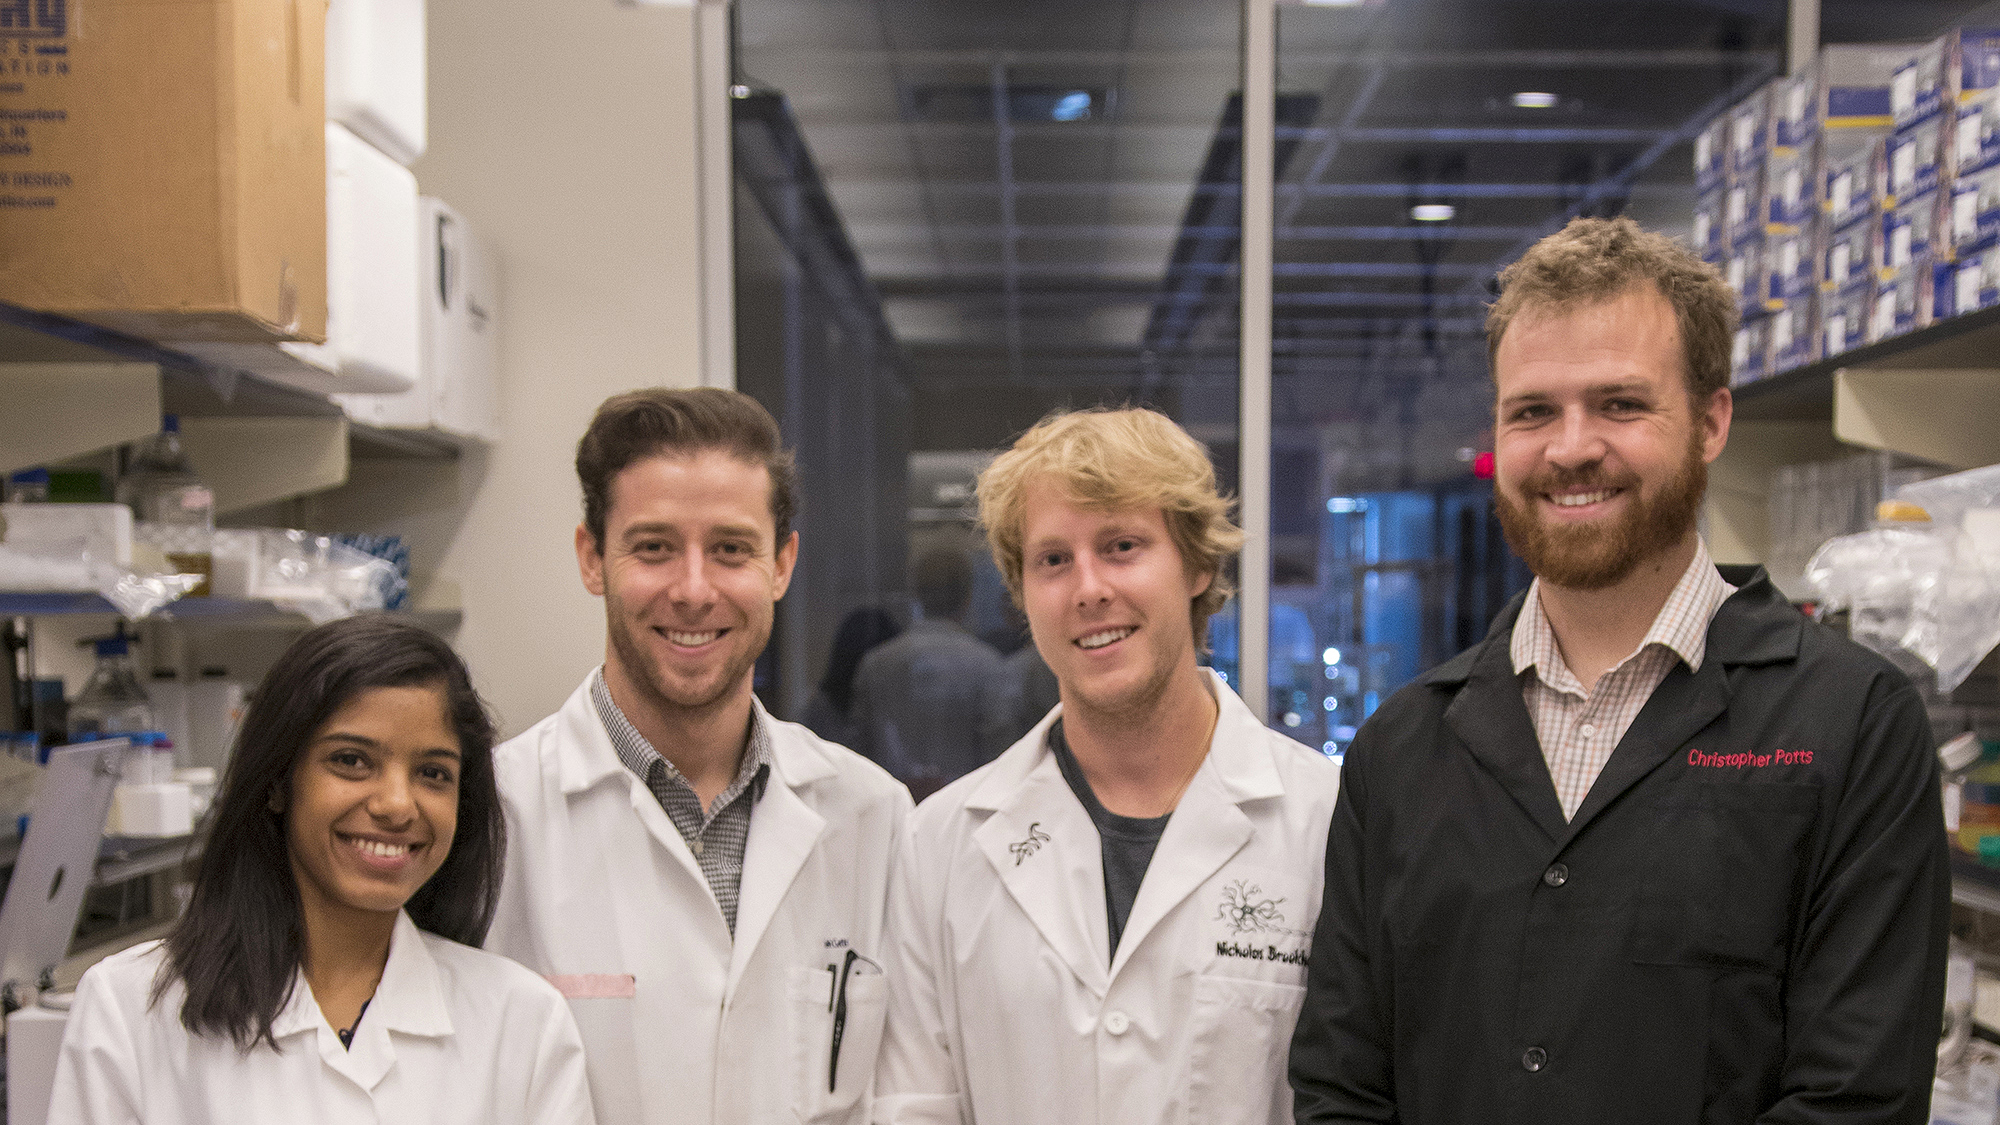 Student Awards: The stem cell wizards of ASU’s Brafman Lab. Left to right: Sreedevi Raman, Josh Cutts, Nick Brookhouser and Christopher Potts. Photographer: Marco-Alexis Chaira/ASU